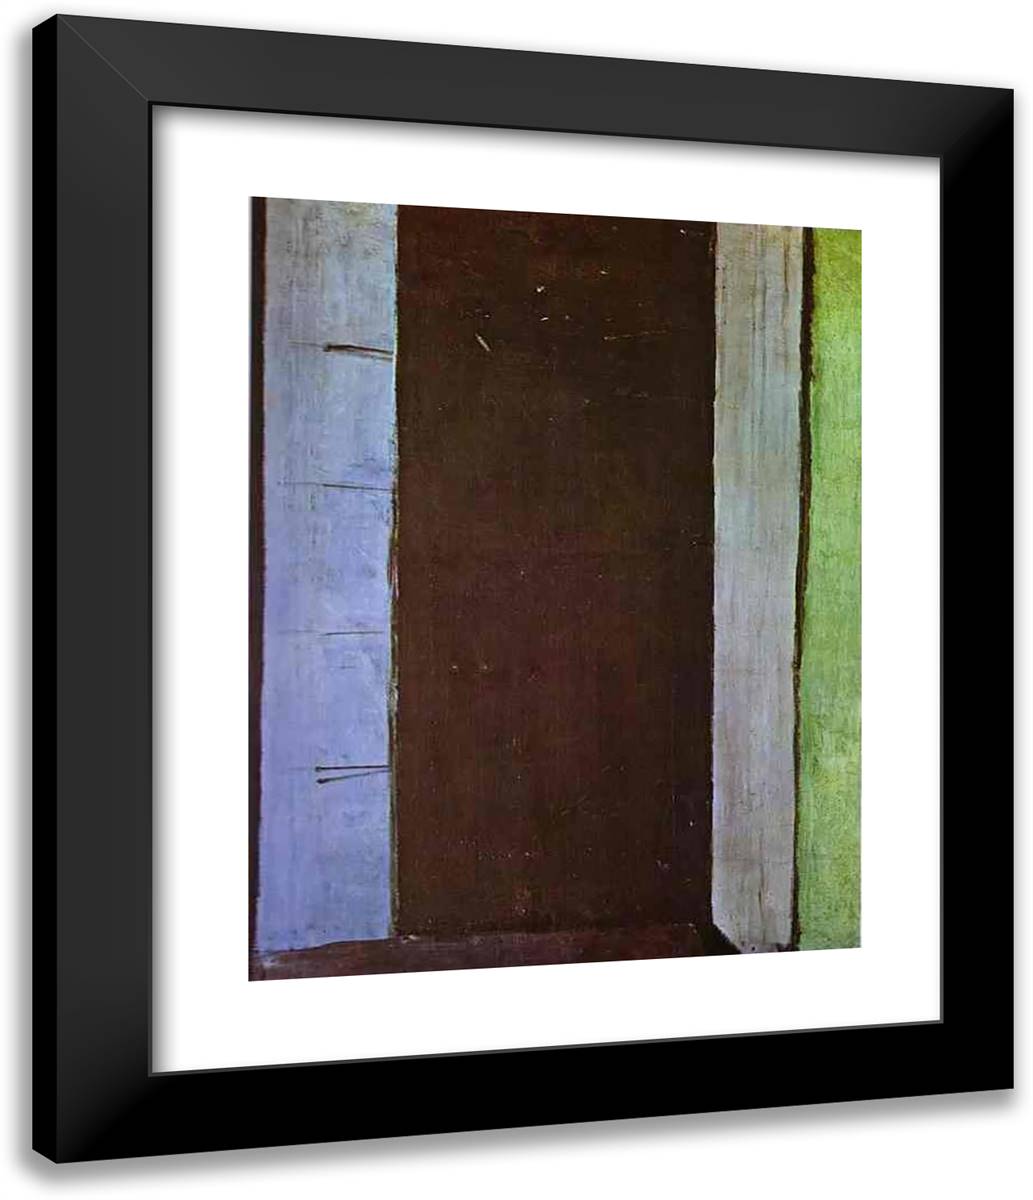 French Window at Collioure 20x24 Black Modern Wood Framed Art Print Poster by Matisse, Henri